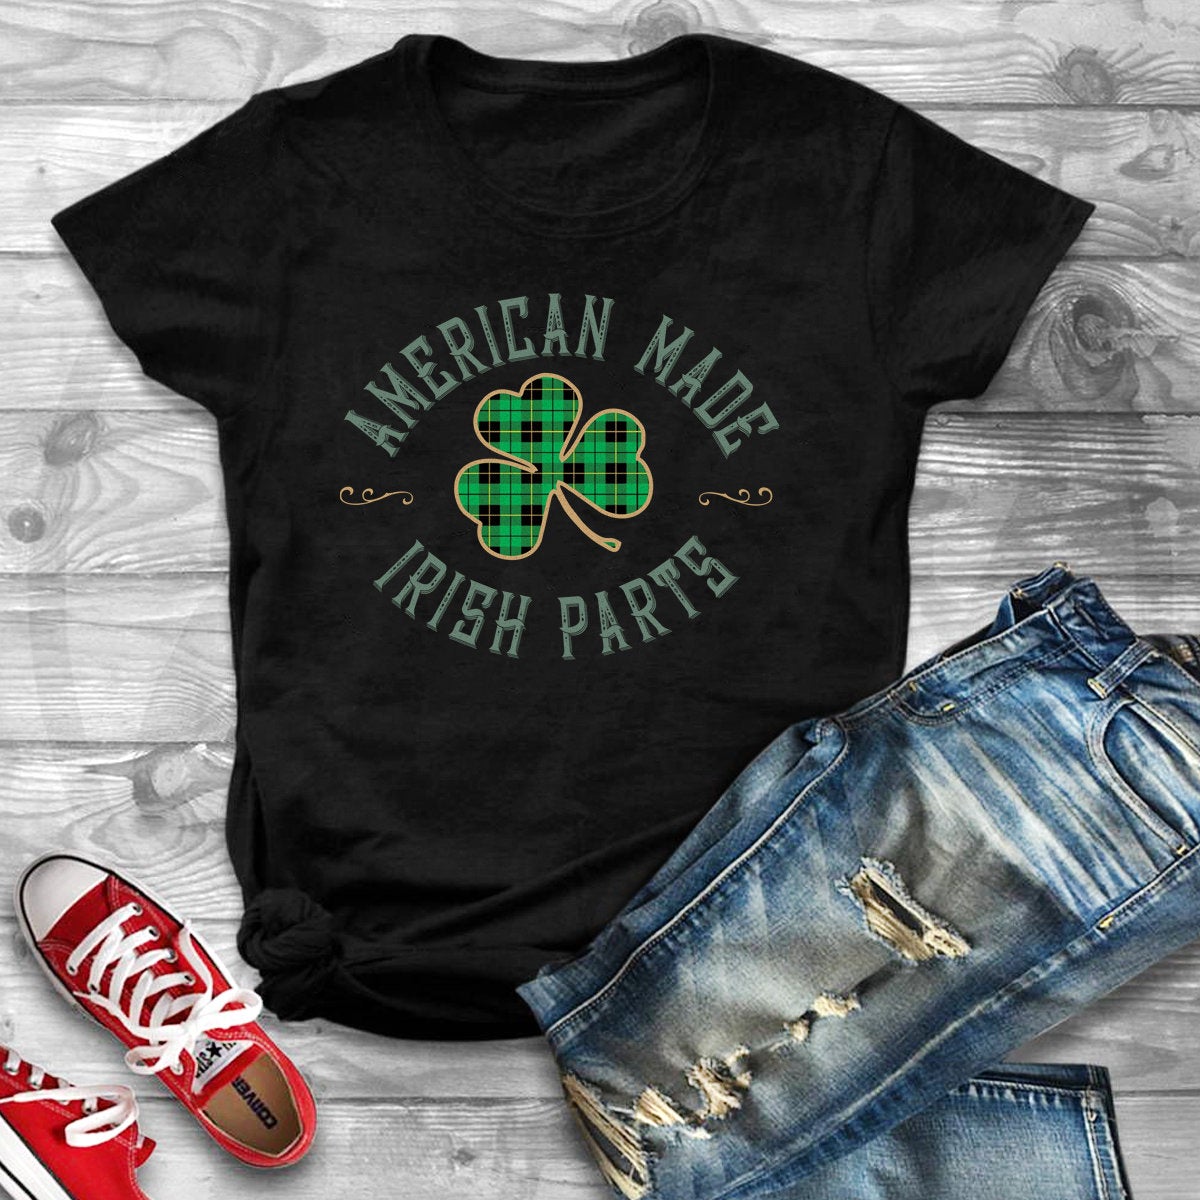 Excited to share the latest addition to my #etsy shop: American Made Irish parts Tee, Womans Irish tee, Mens irish tee, Unisex irish tee etsy.me/3u9yIuq #stpatricksday #americanmade #irishparts #irishtee #irishtshirt #stpattysdaytee #americanirishtee #irishamer